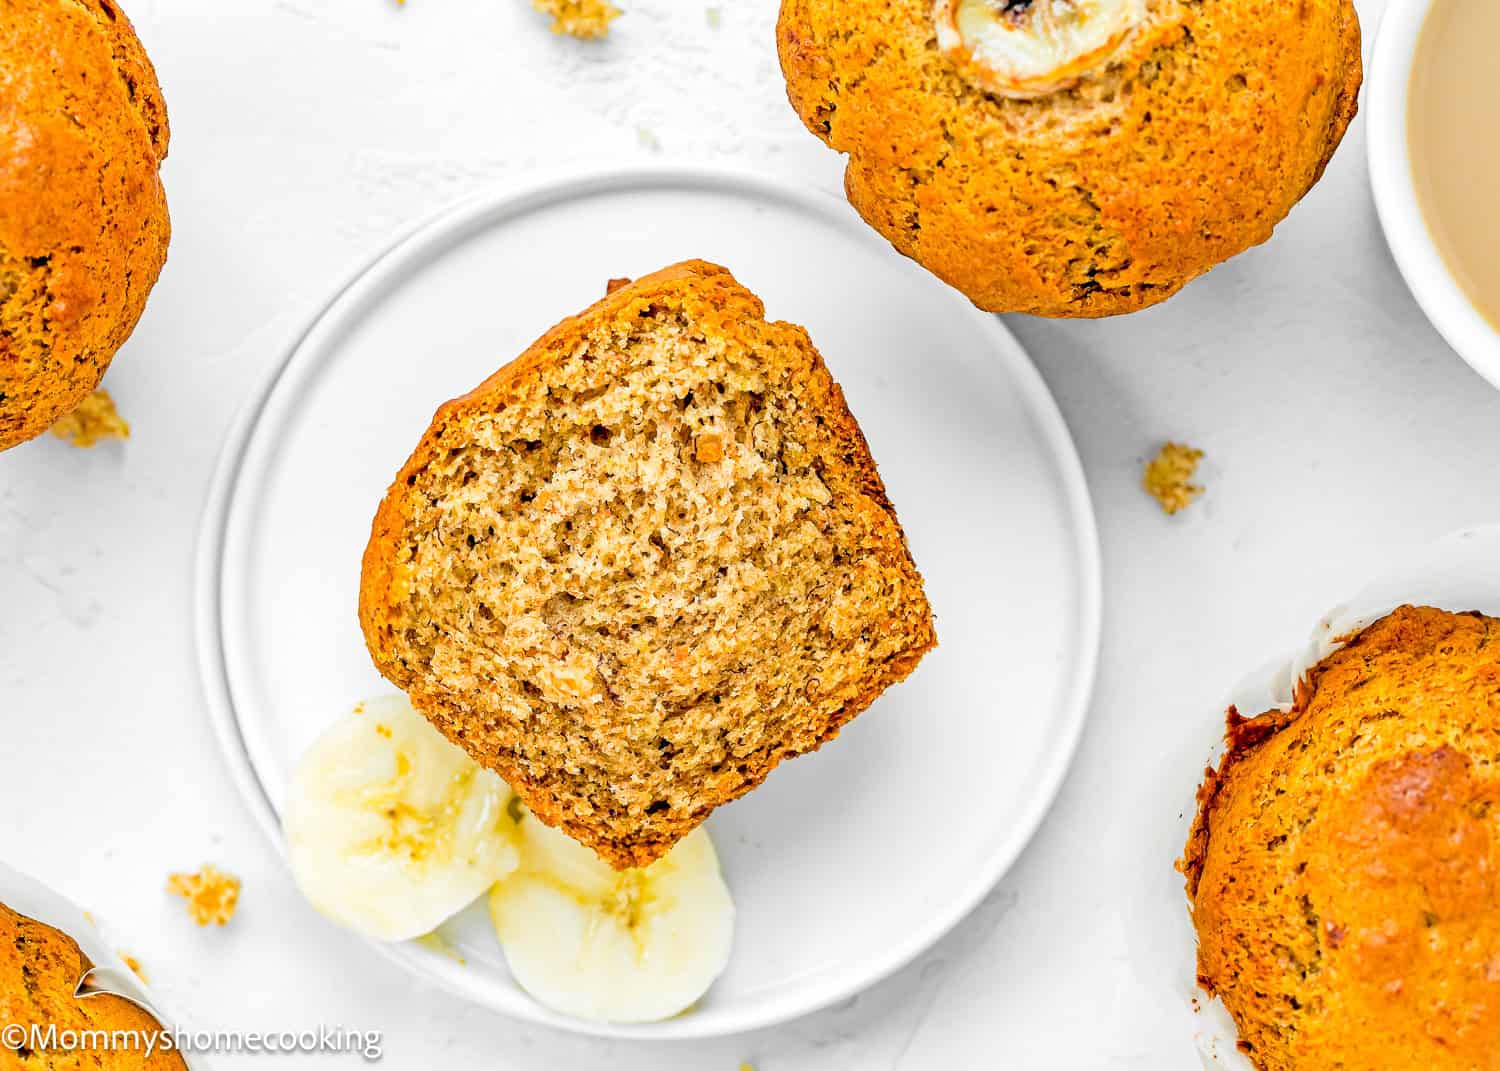 A Healthy Easy Banana Muffin cut in half made with no sugar, eggs or dairy on a small plate.